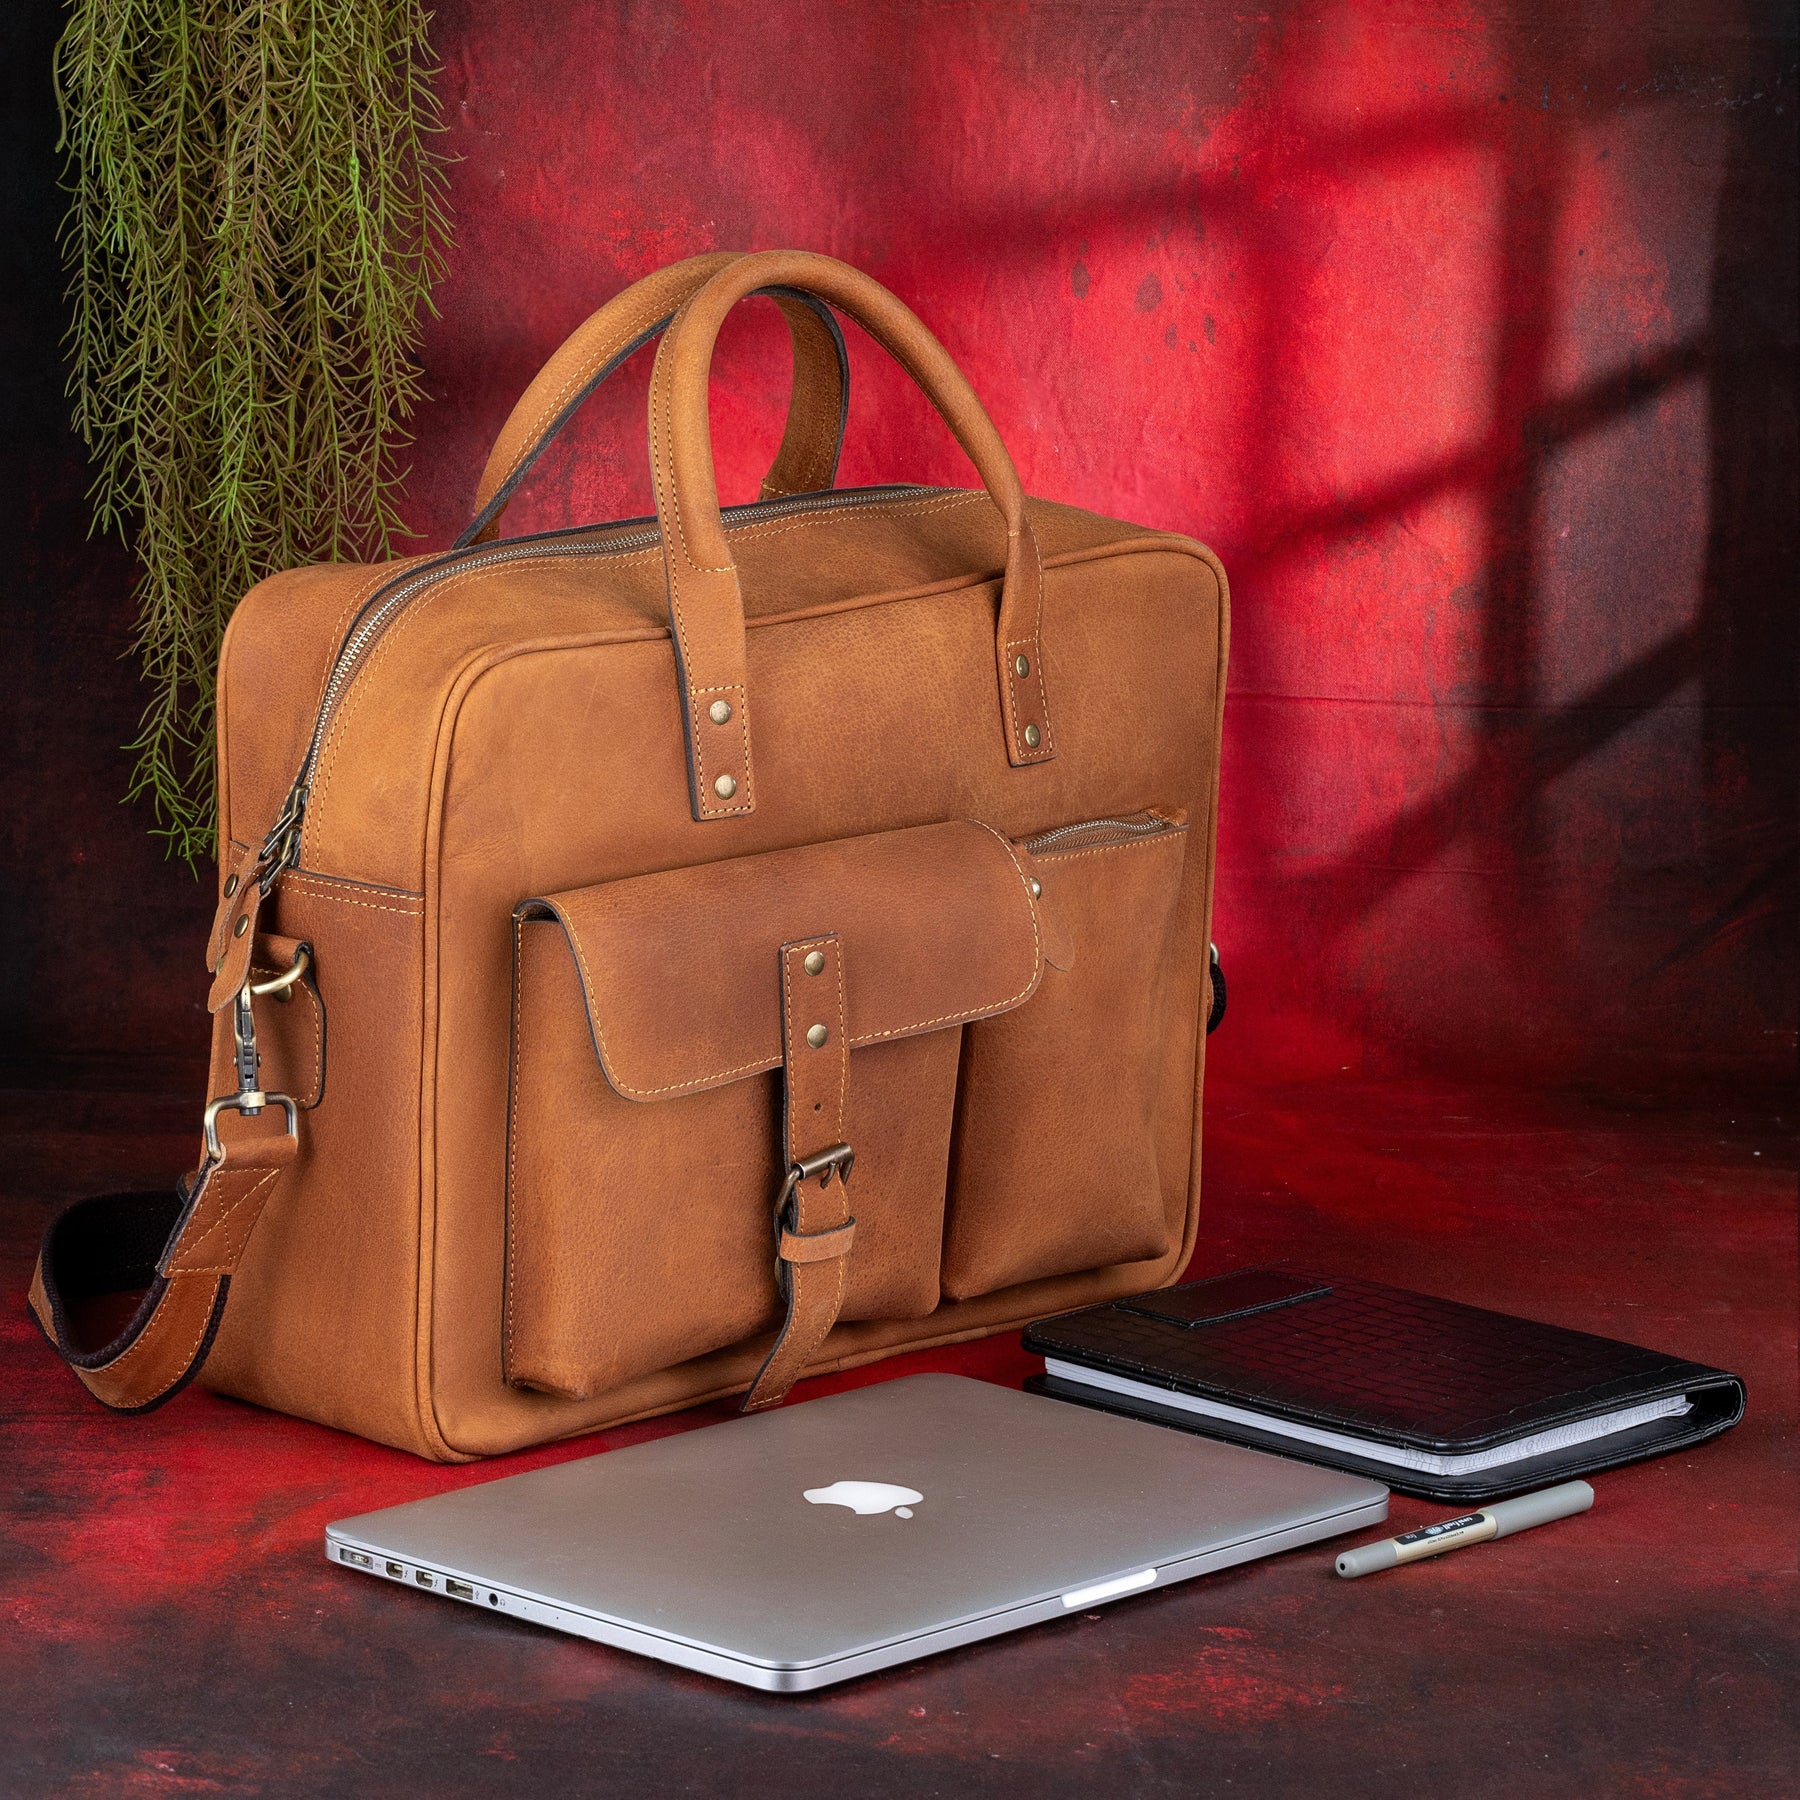 OES Briefcase - Brown Leather - Bricks Masons